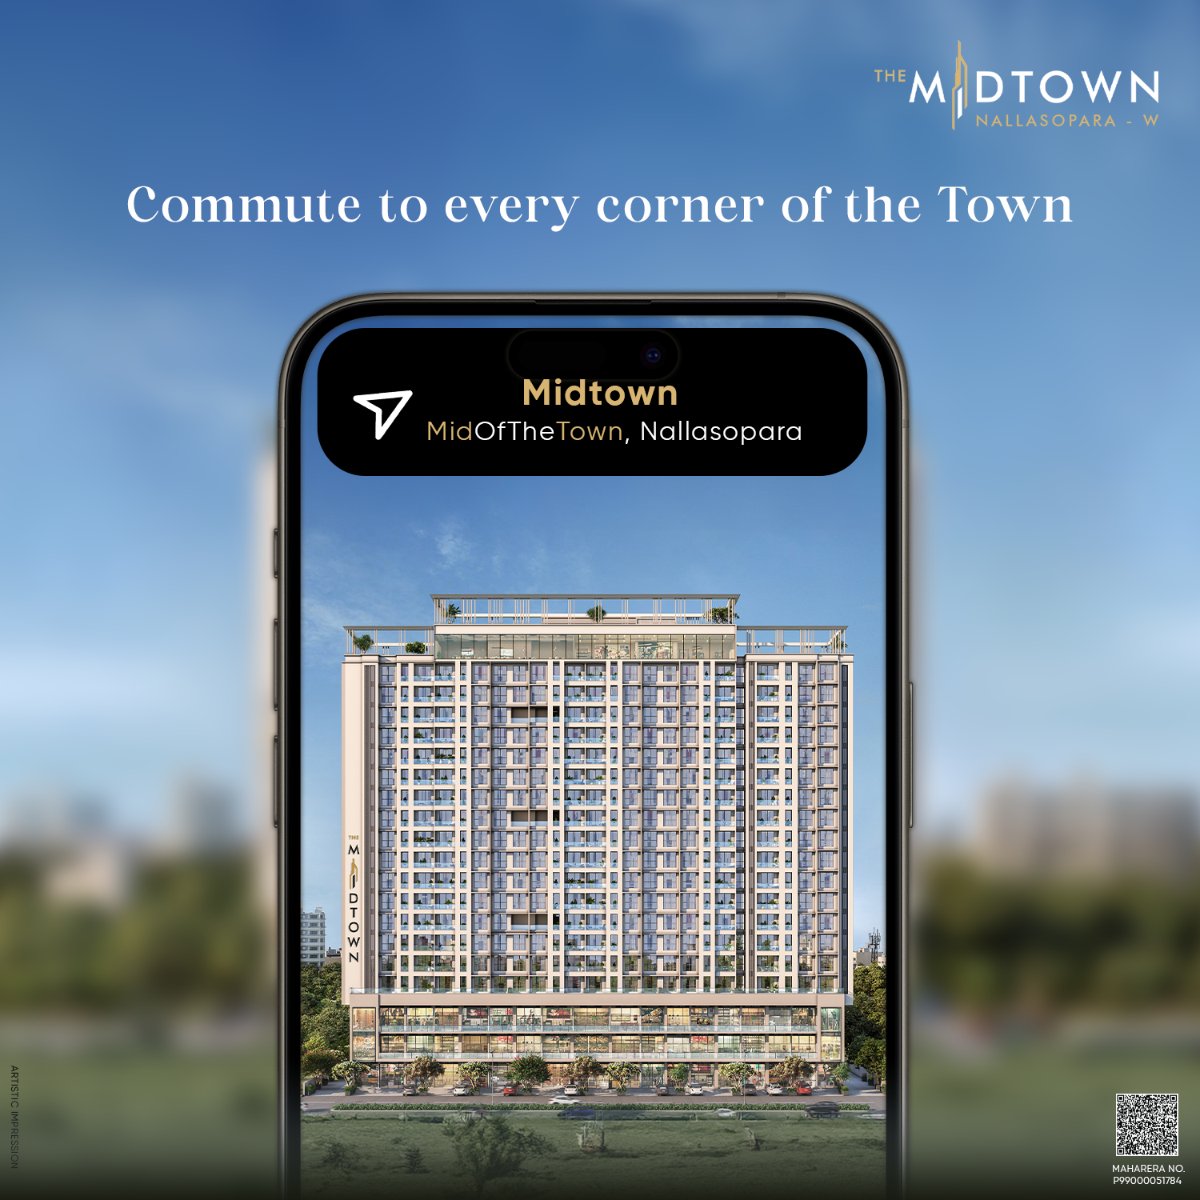 Midtown is a place where you get easy access to every corner of the Town because you live #InTheMidOfTheTown